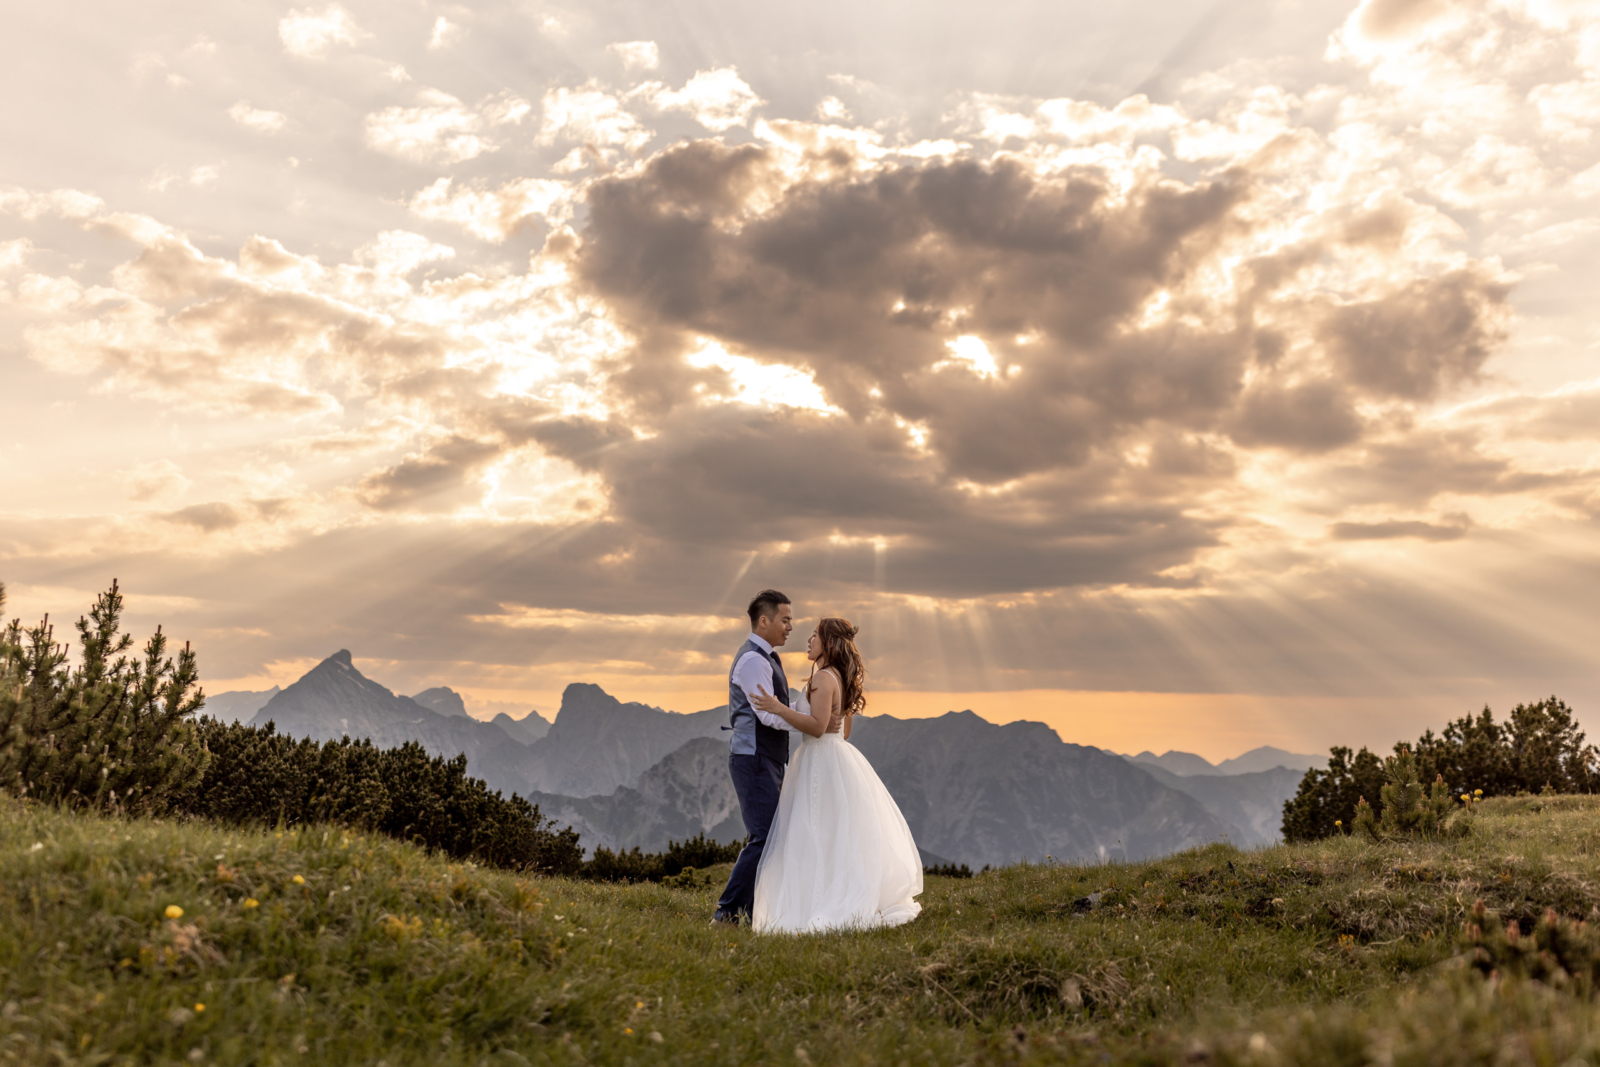 Hiking elopement experience in the austrian alps